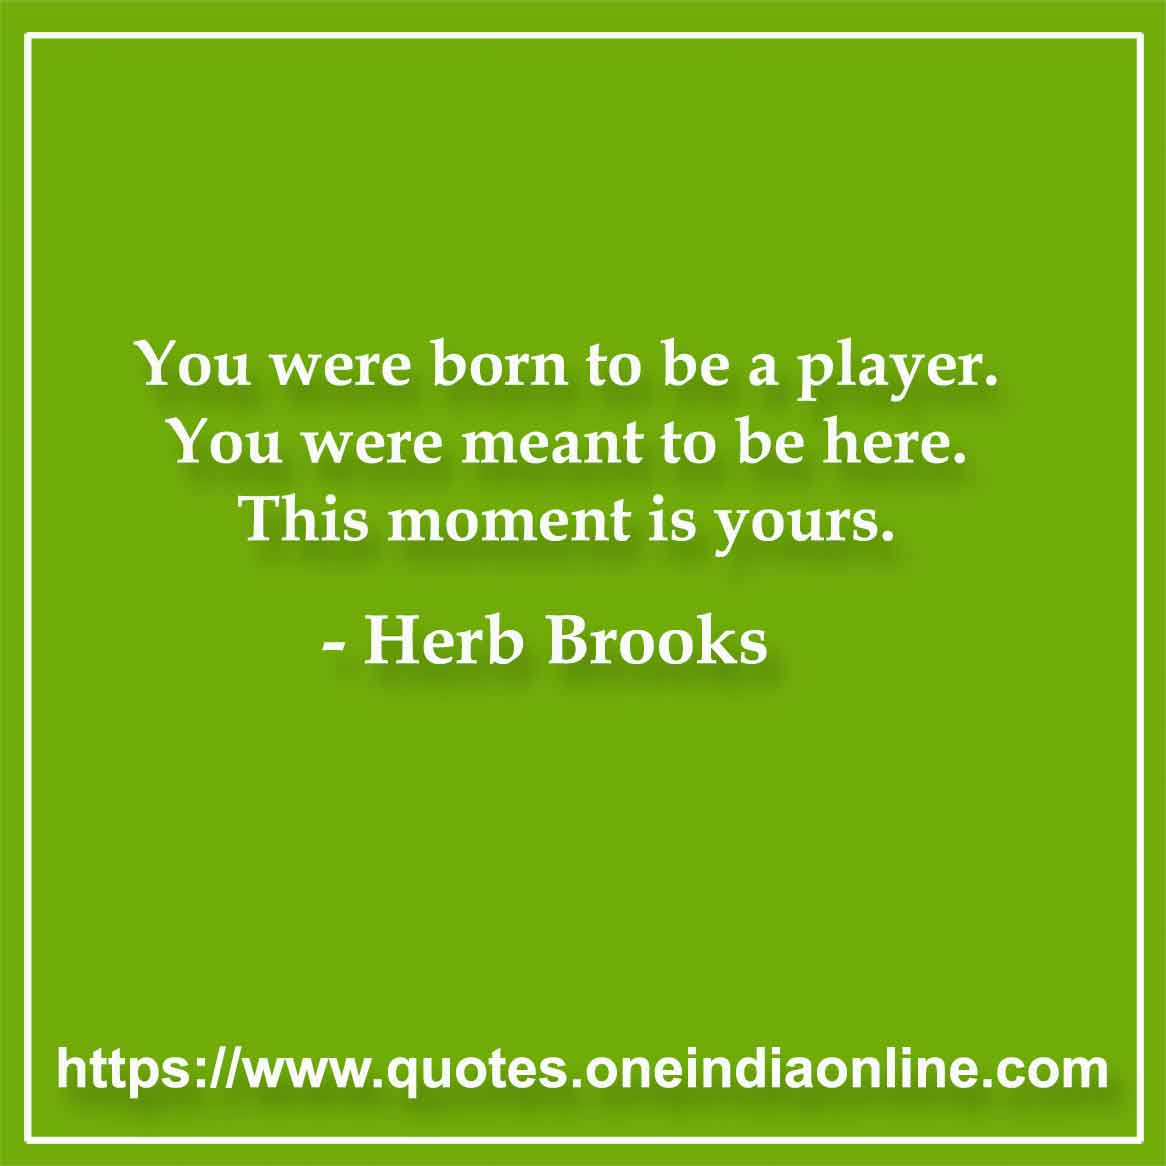 You were born to be a player. You were meant to be here. This moment is yours. - Herb Brooks